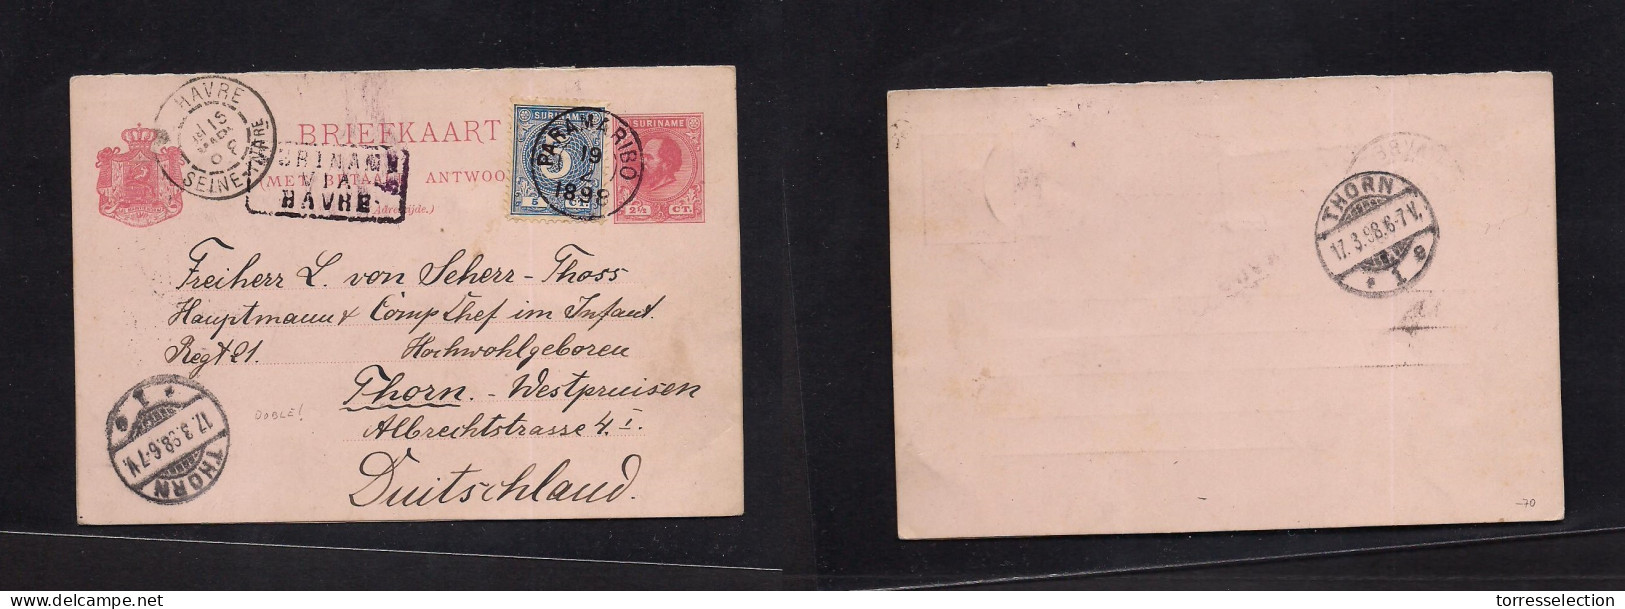 SURINAME. 1898 (19 Febr) Paramaribo - Germany, Thorn (17 March) Doble 2 1/2 Ct Tied Stat Card, Used On Way Out + Adtl 5c - Suriname